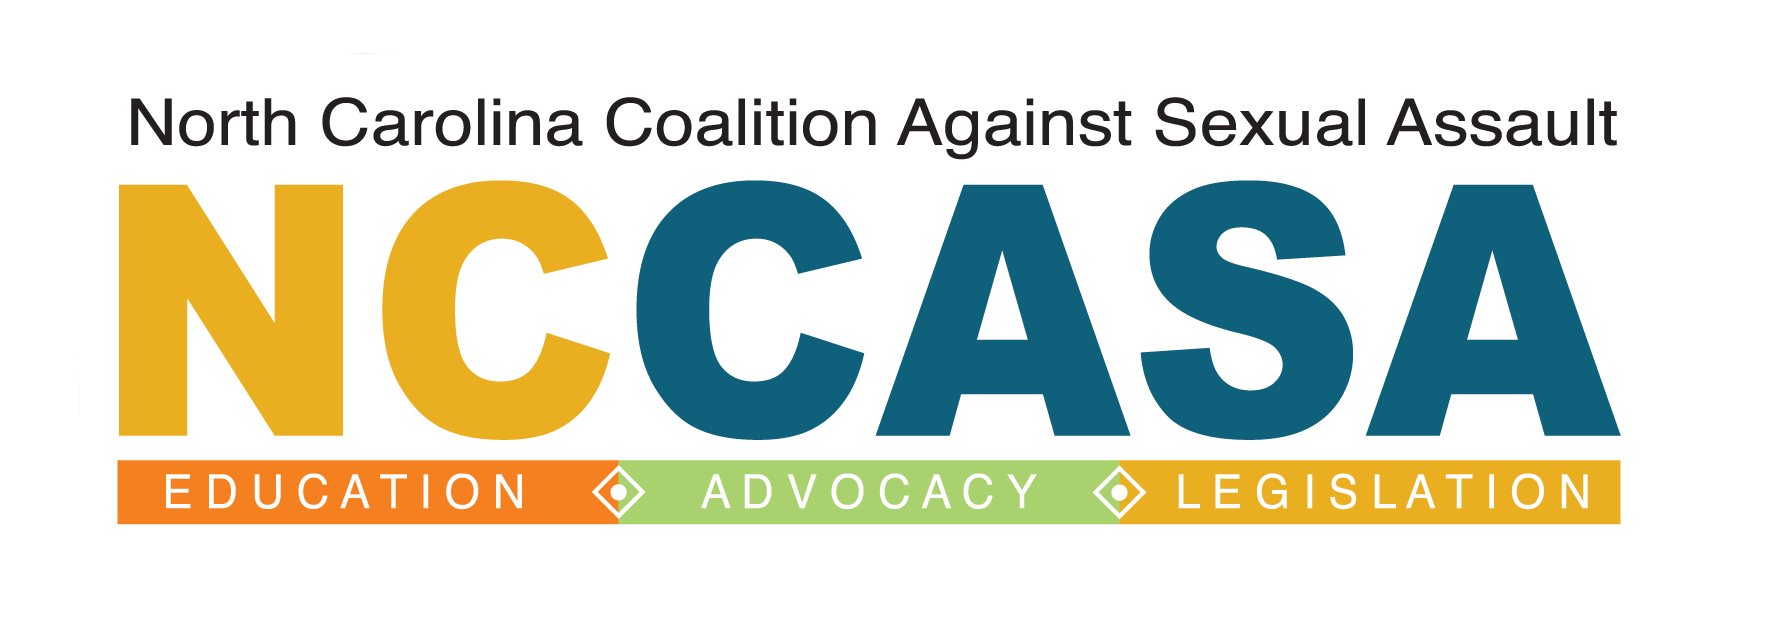 NCCASA-with-name-.png